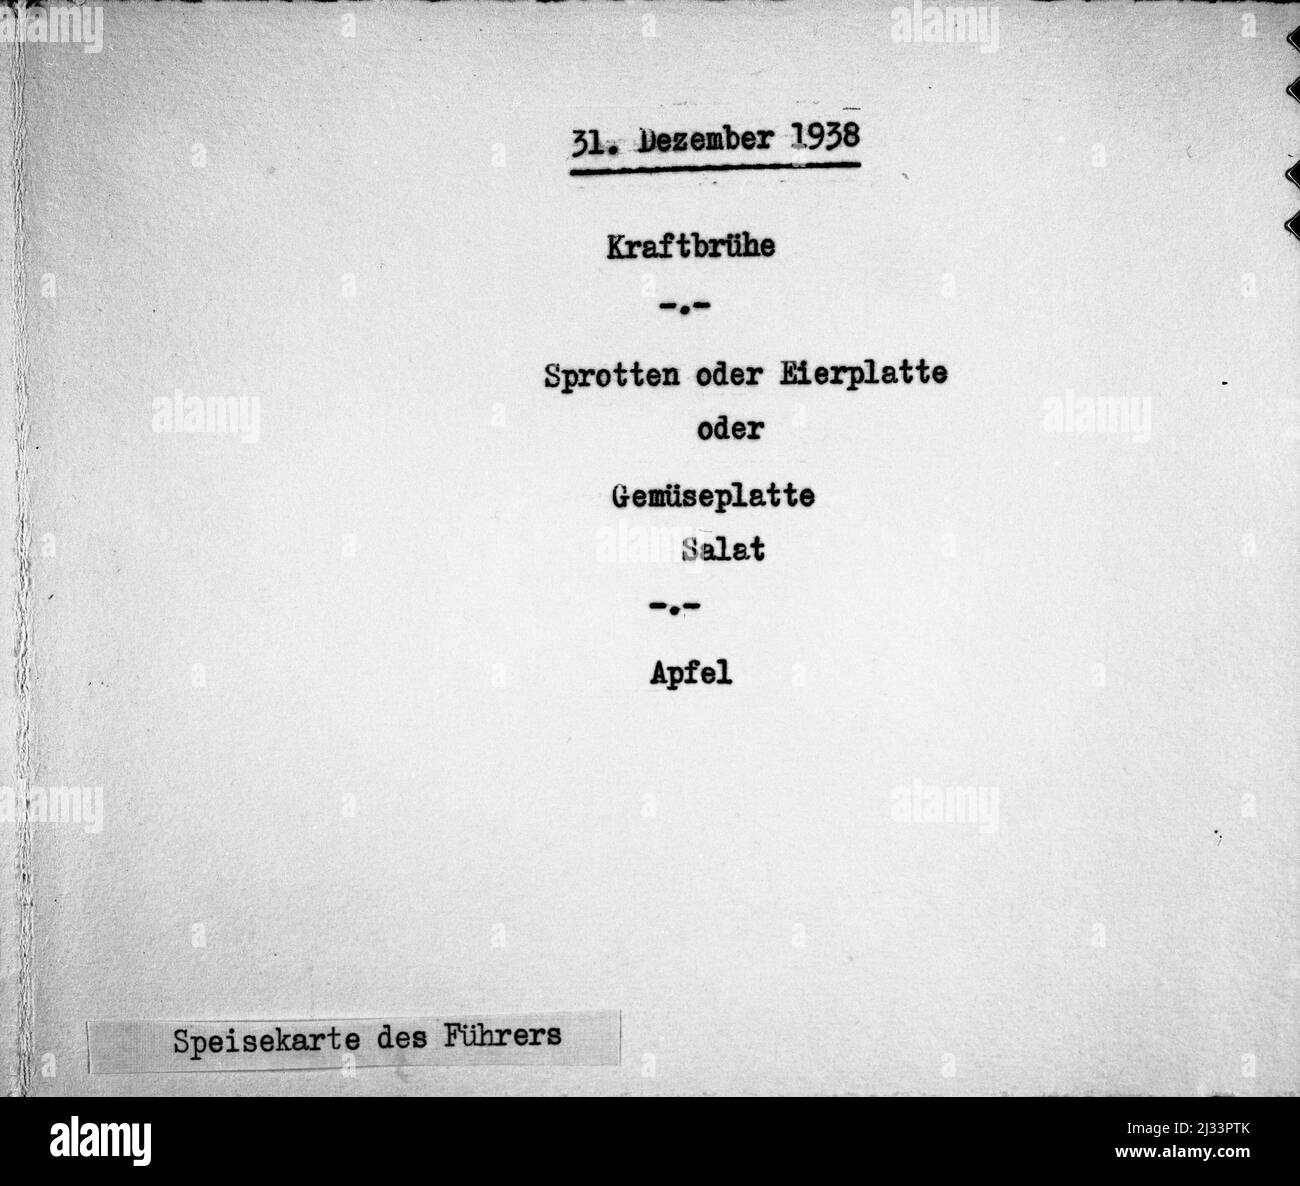 31. Dezember 1938KraftbrüheSprotten oder EierplatteroderGemuseplatterSalatApfelSpeisekarte des Führers -  31. December 1938ConsomméSprats or Egg PlatterorVegetable PlatterSaladAppleMenu of the Führer. Eva Braun's Photo Albums, ca. 1913 - ca. 1944. These albums are attributed to Eva Braun (four are claimed by her friend Herta Schneider, nee Ostermeyer) and document her life from ca. 1913 to 1944. There are many photographs of Eva, her sisters and their children, Herta Schneider and her children, as well as photographs of Eva's vacations, family members and friends. Included also are photographs Stock Photo